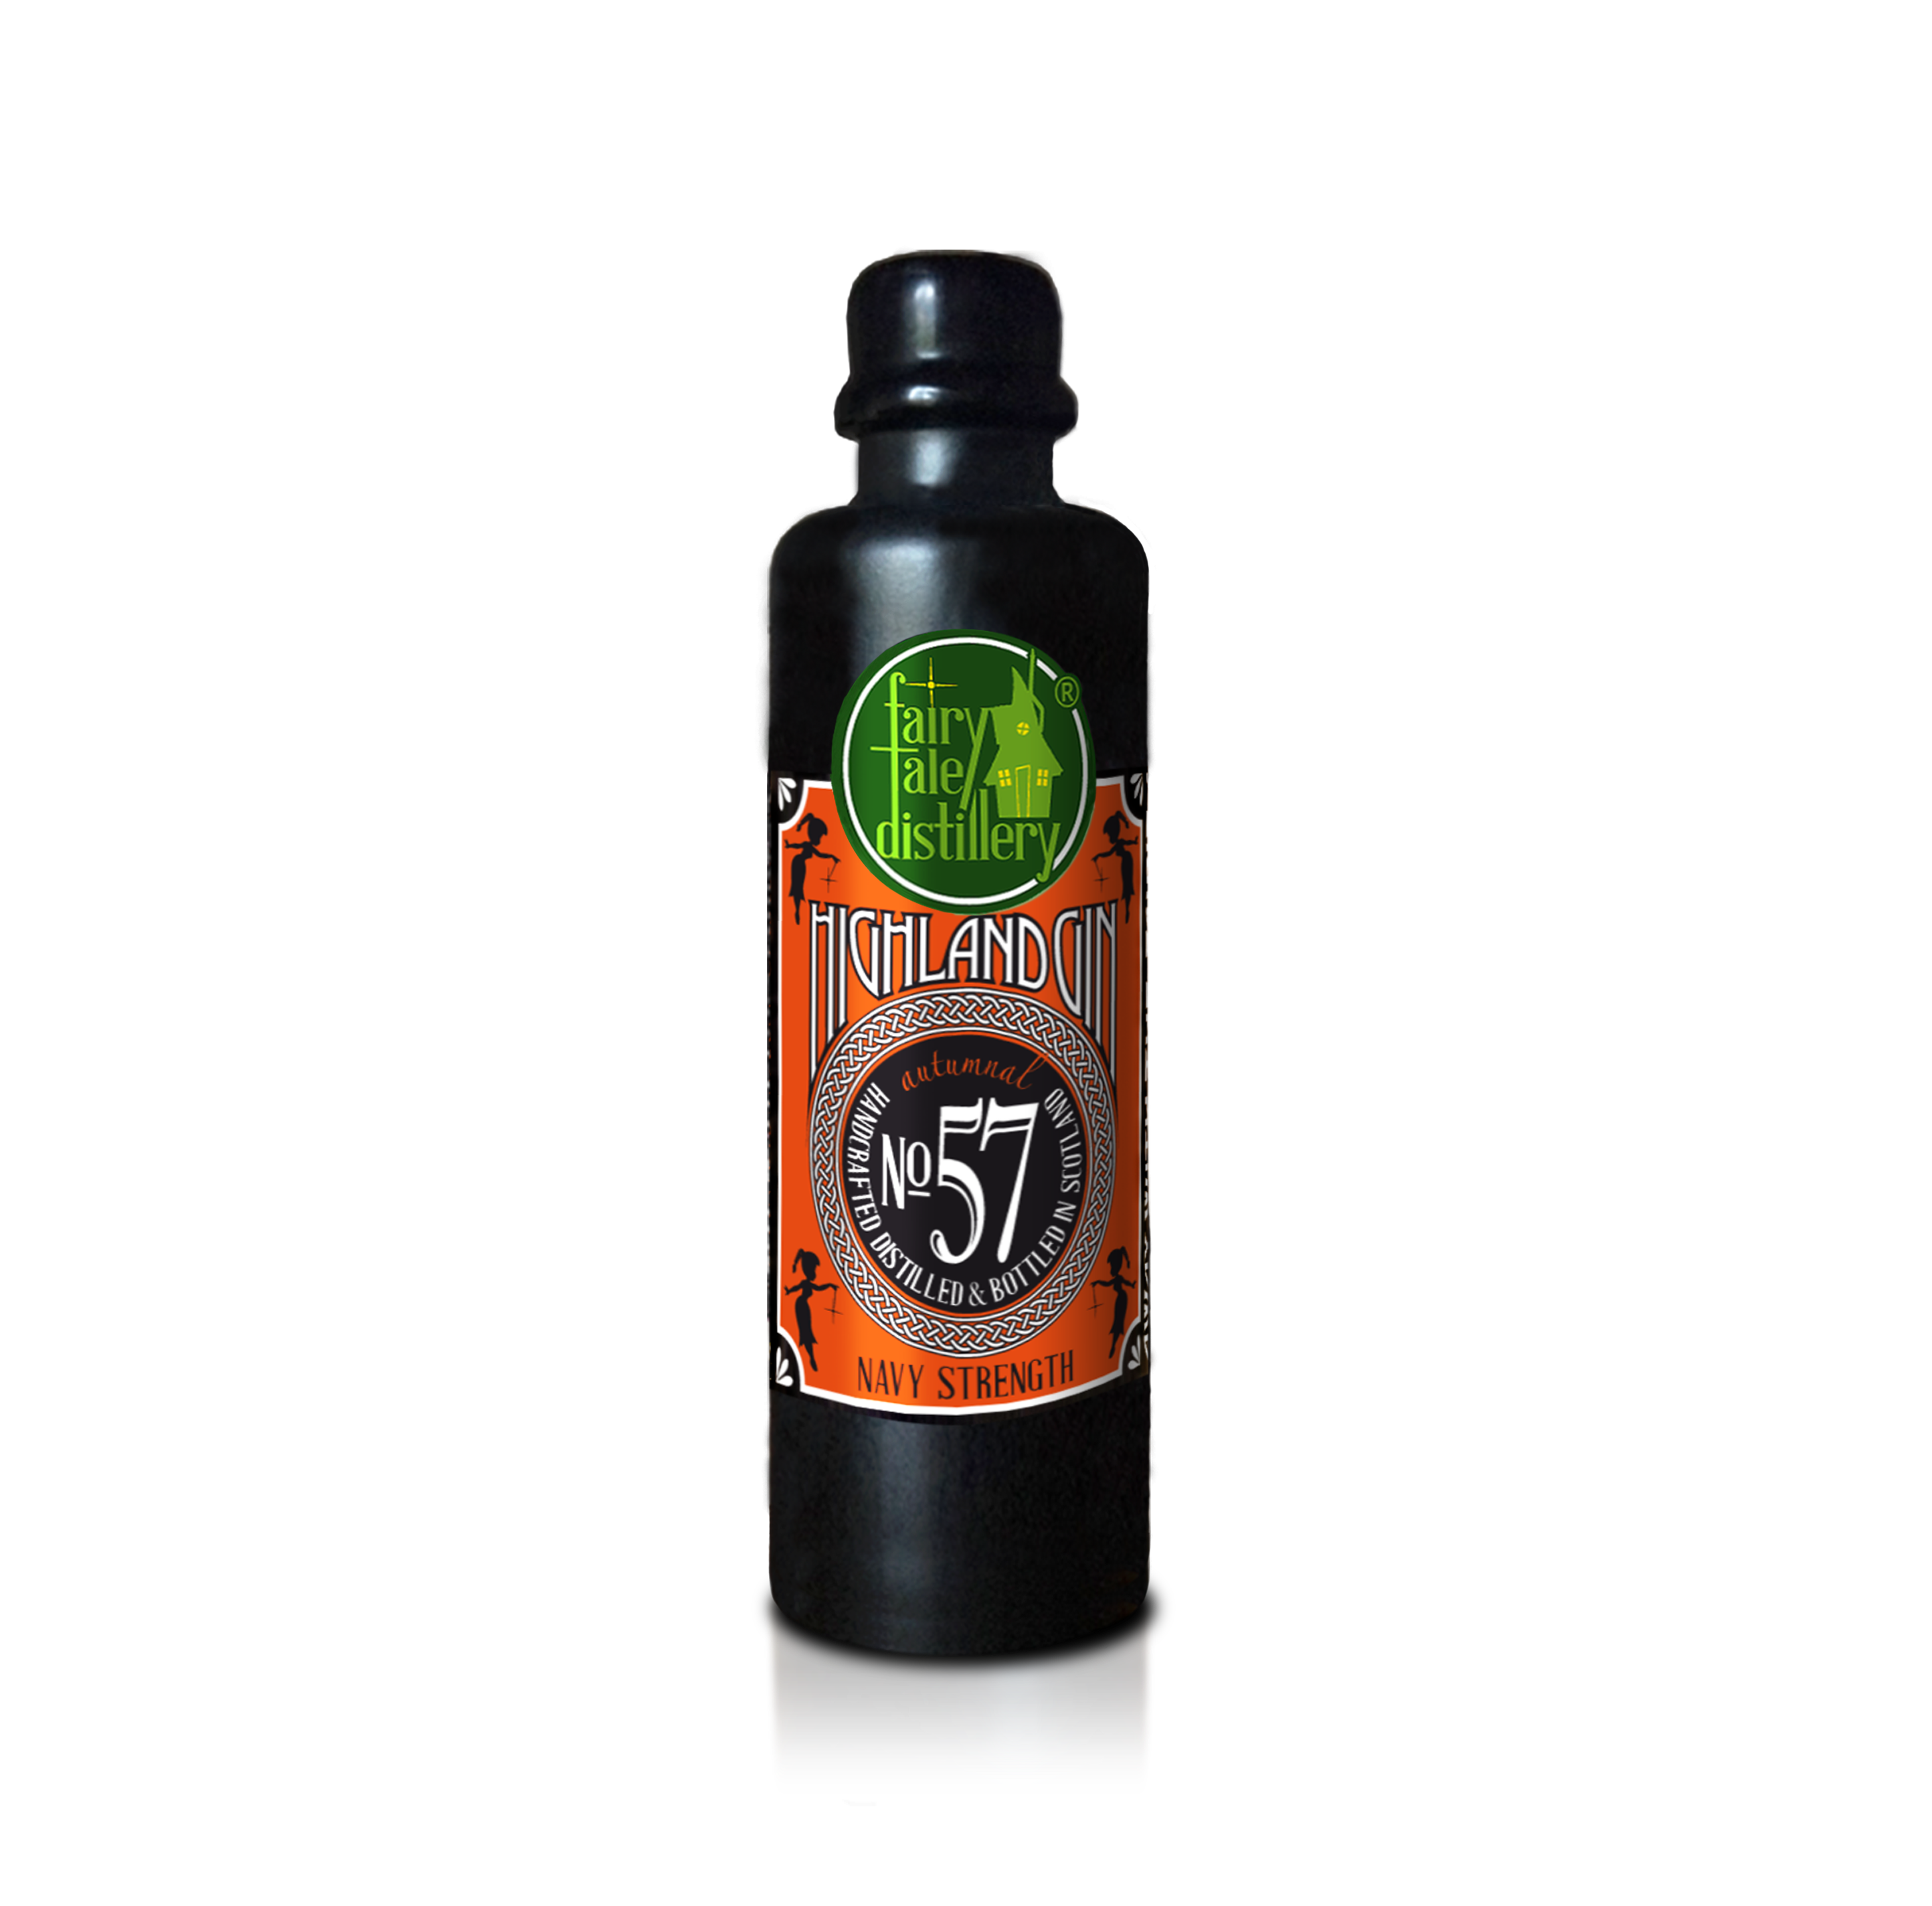 No 57 Autumnal Navy Strength Highland Gin bottle 0,2l from Fairytale Distillery